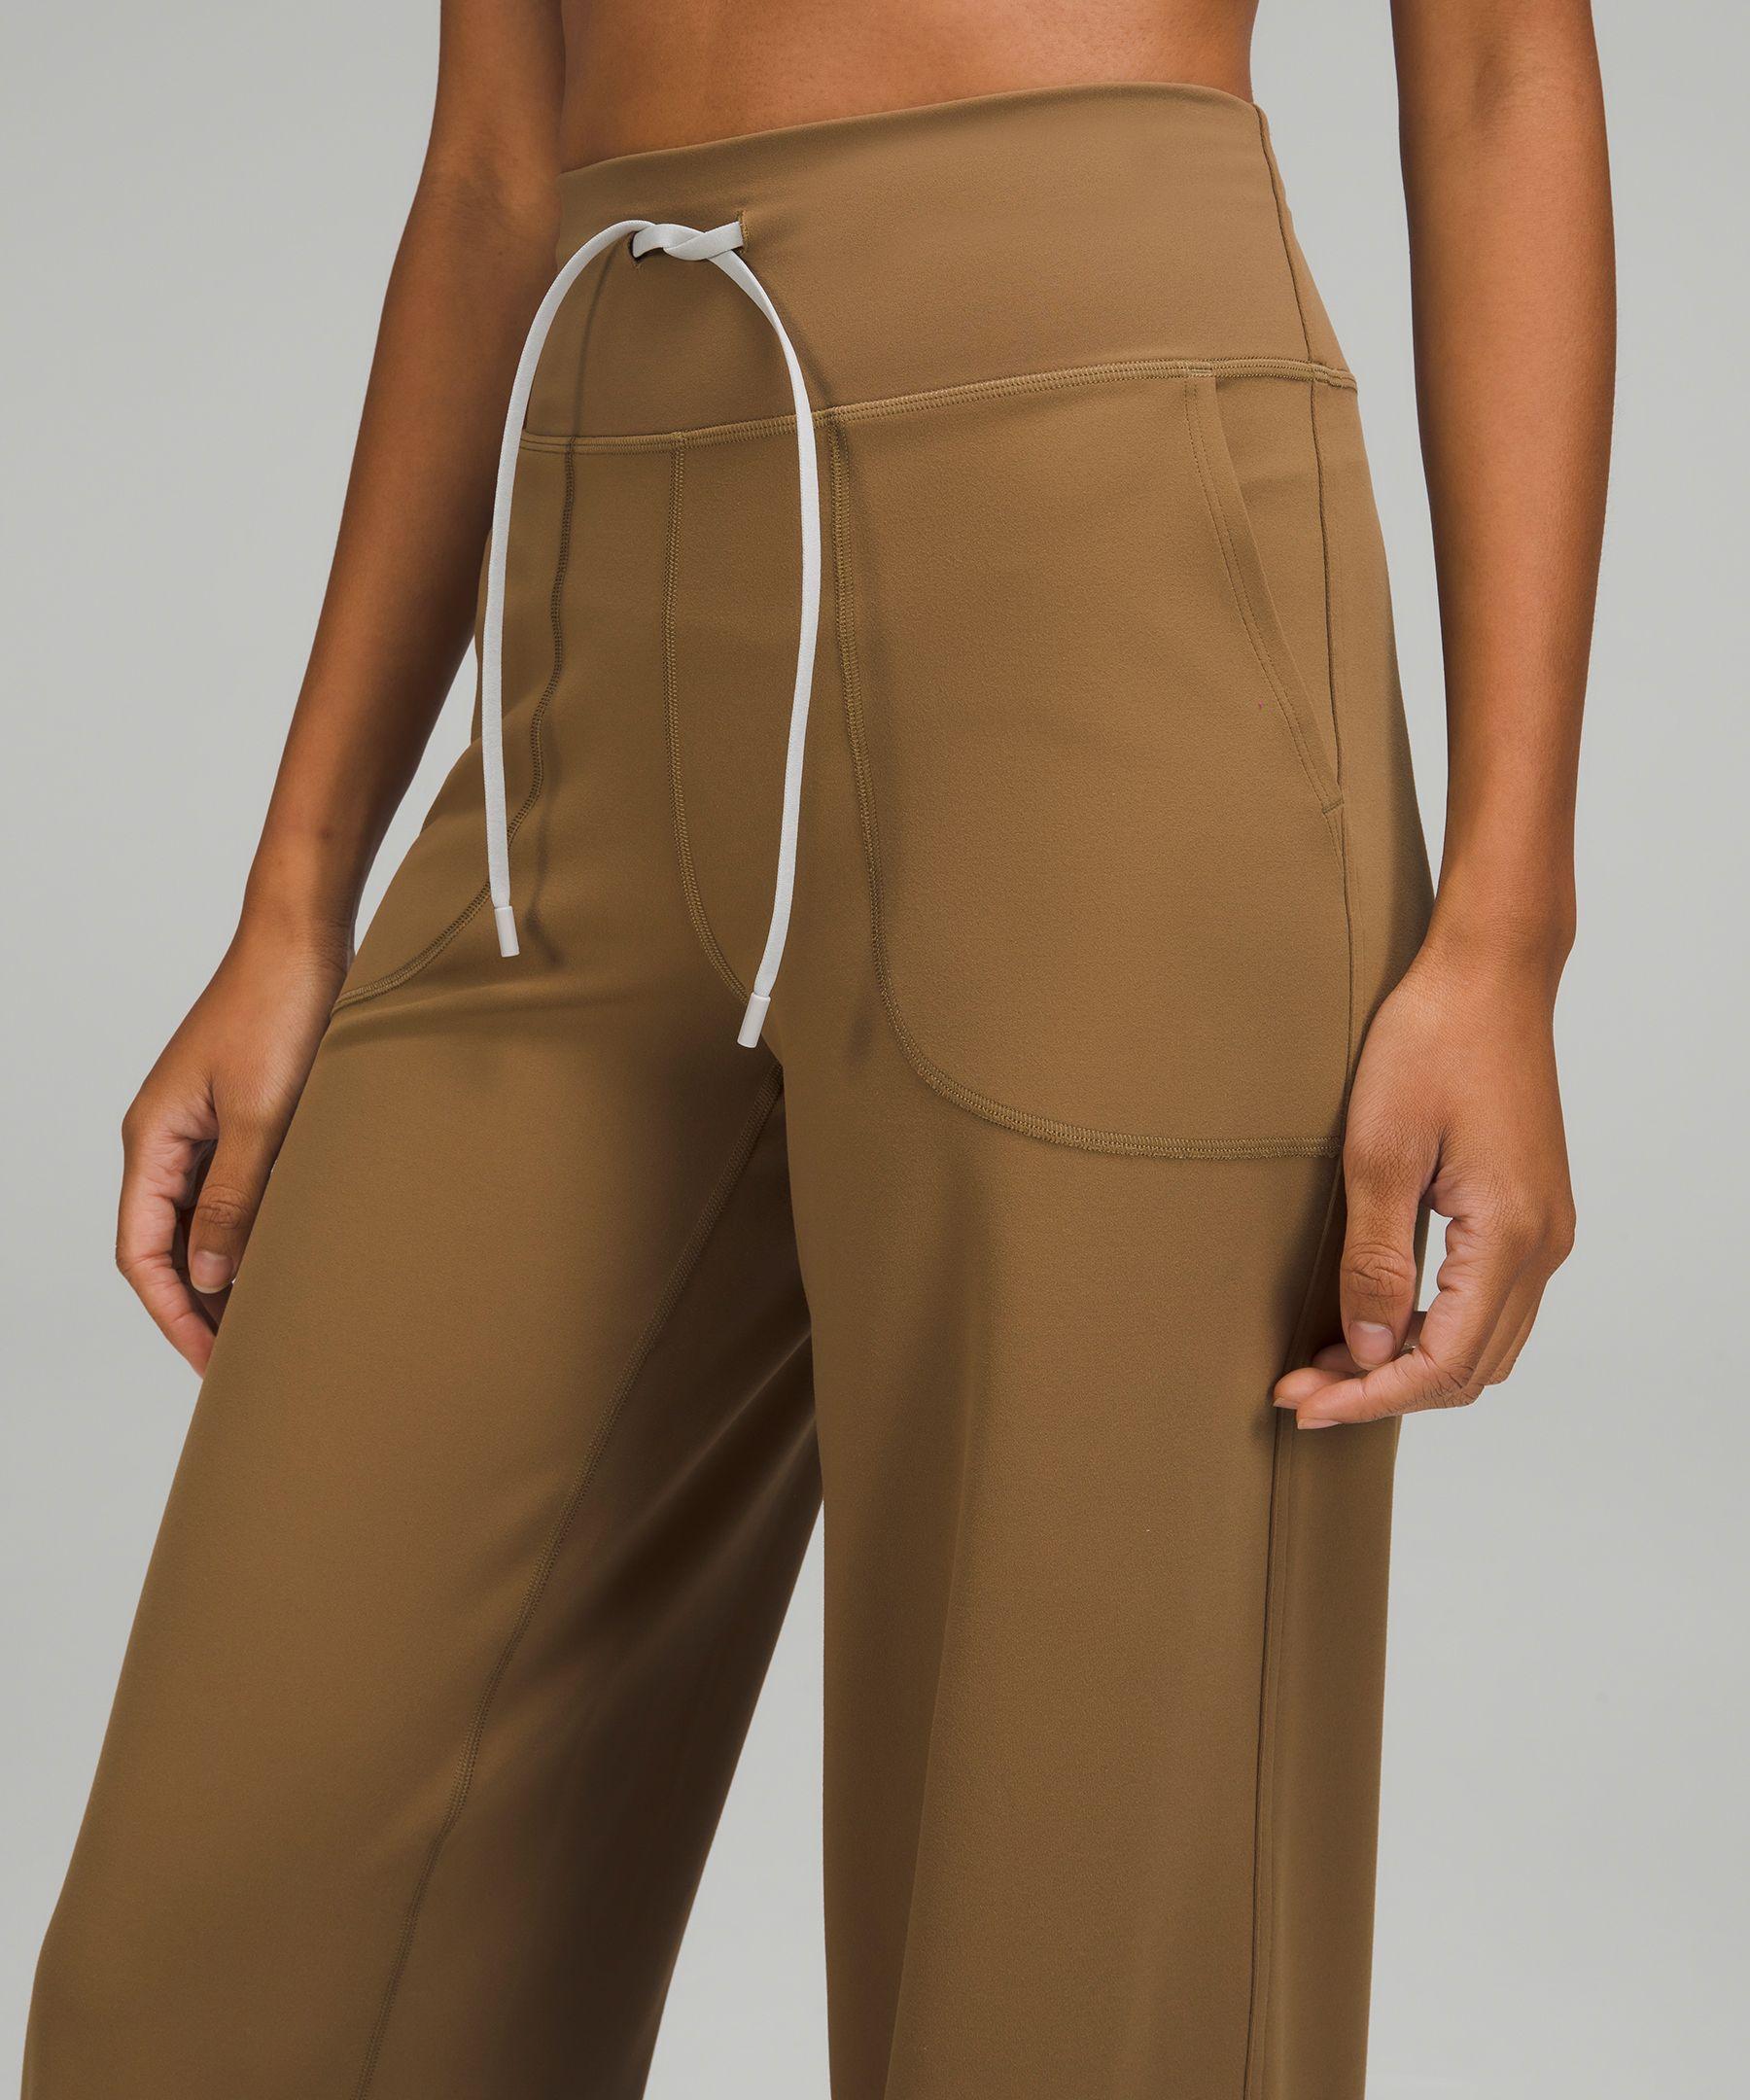 lululemon athletica Throwback Still Pant in Natural